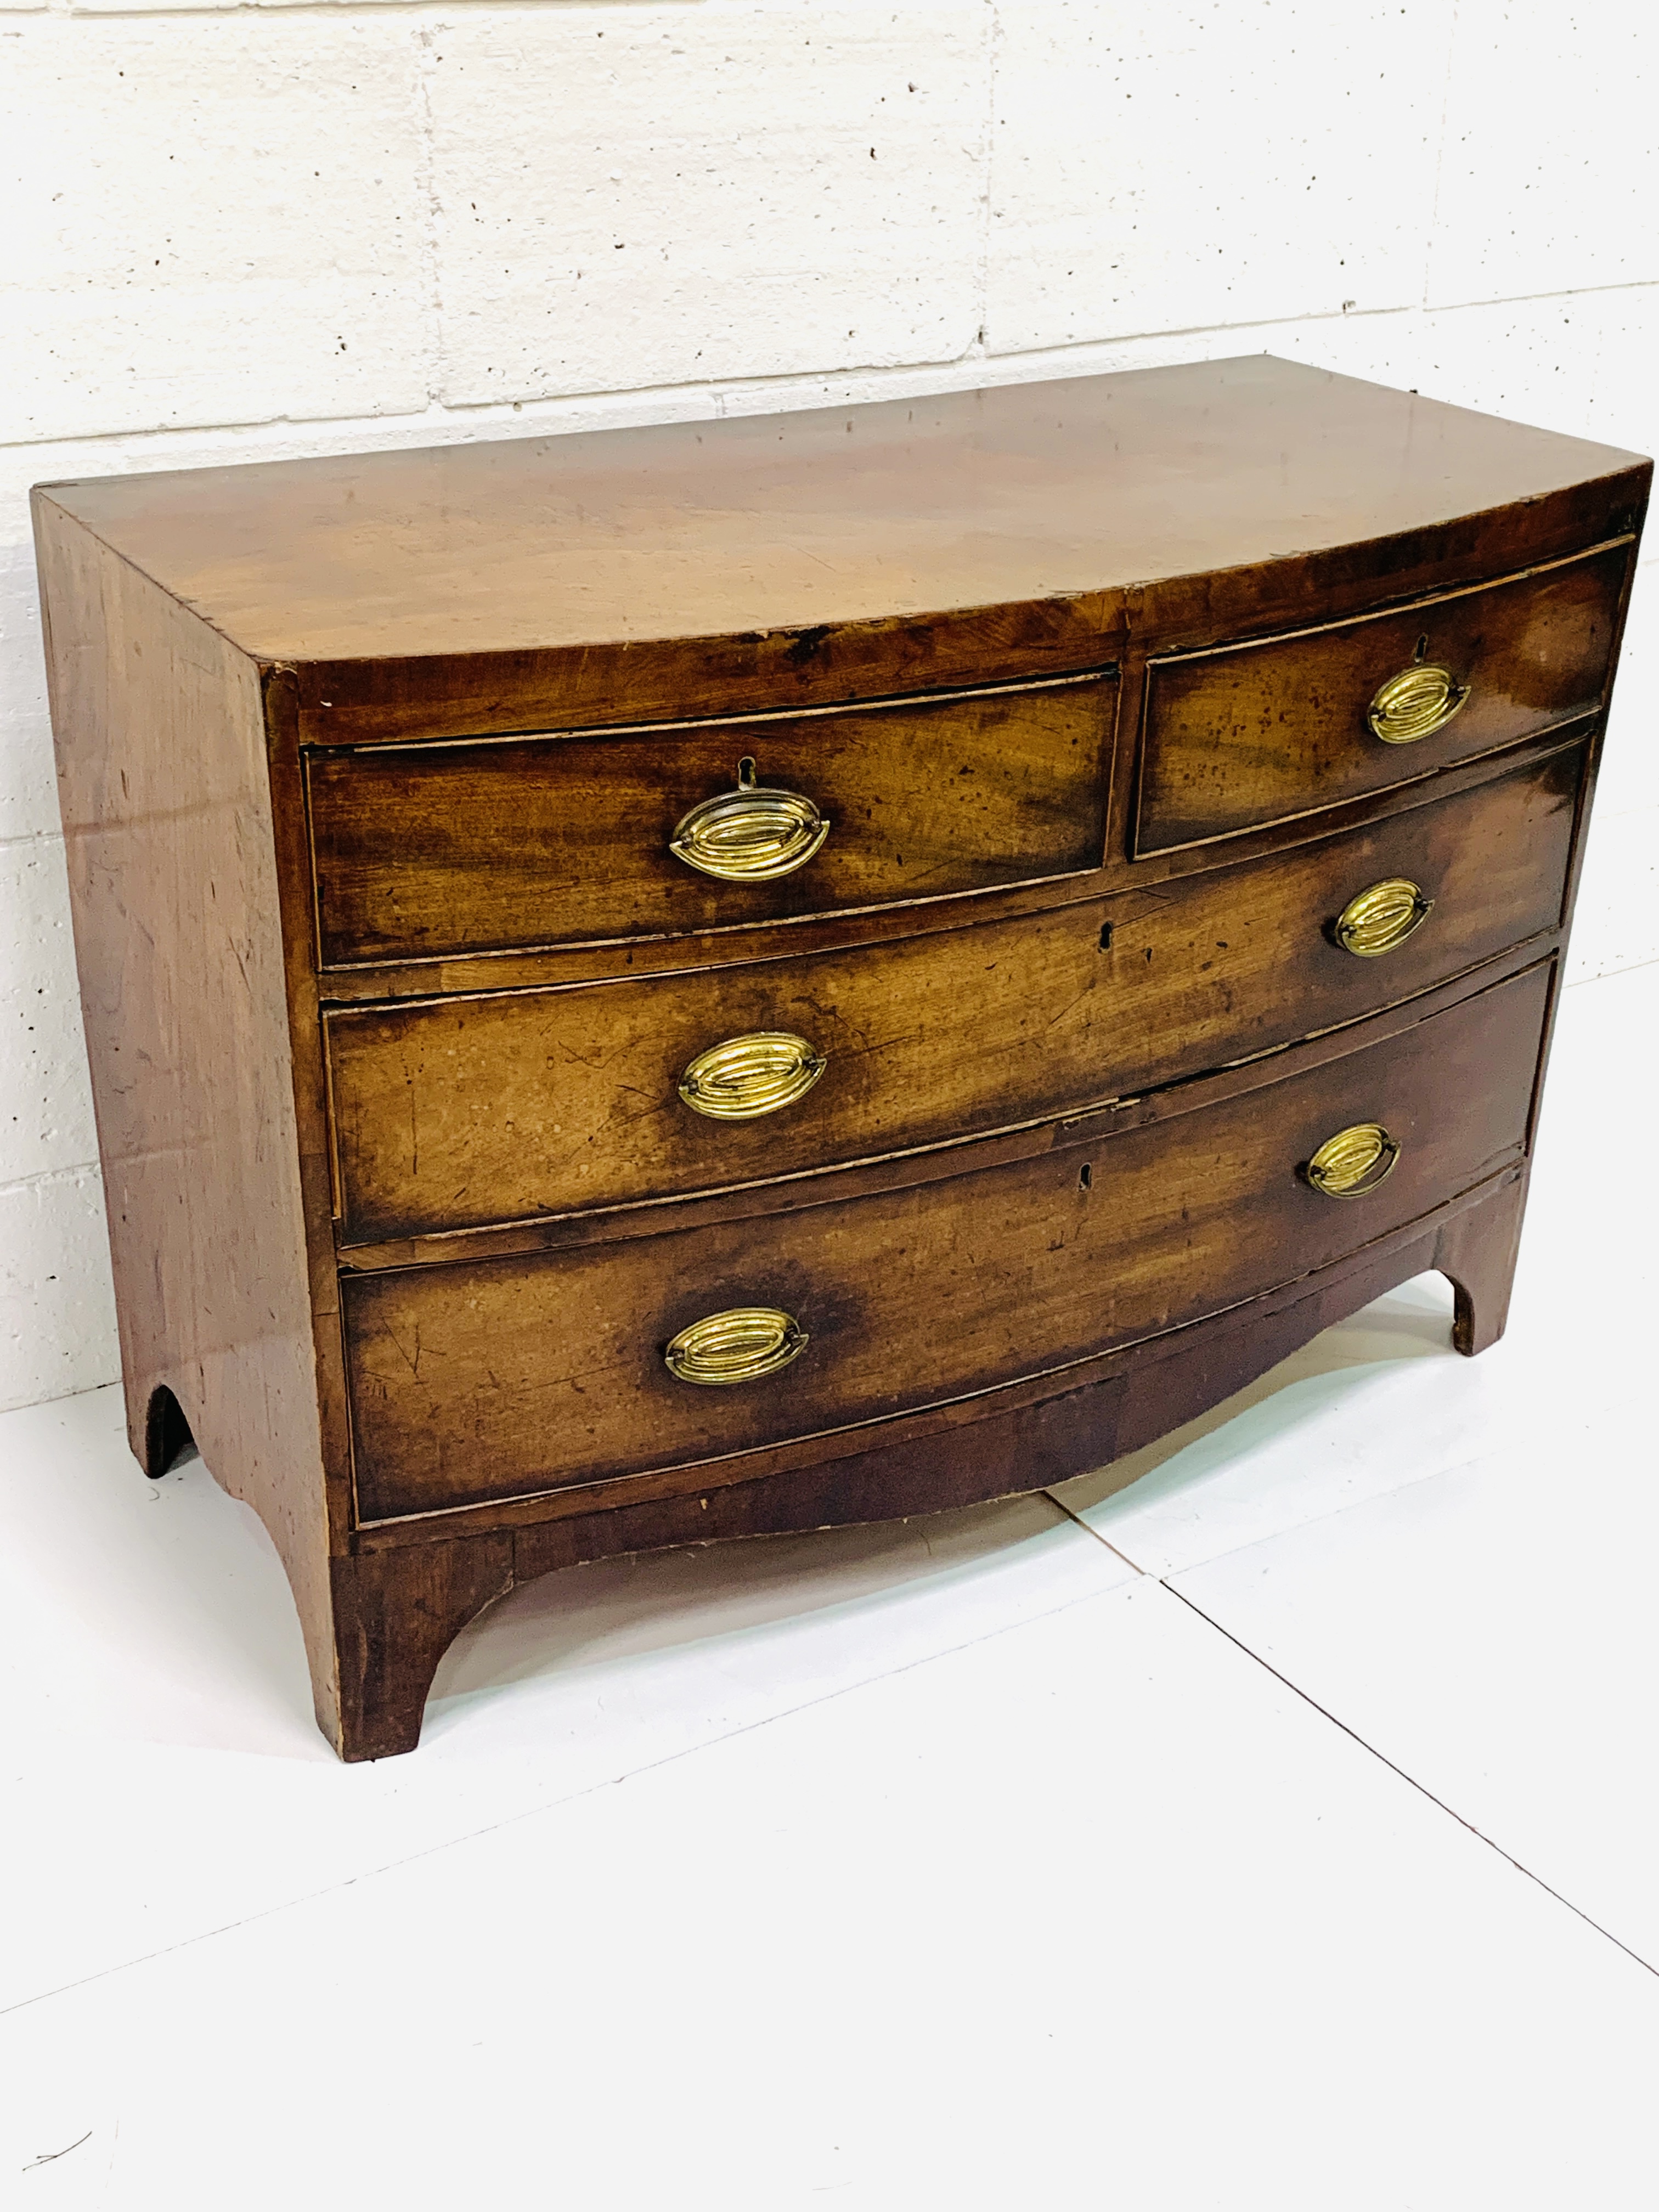 Early 19th Century bow fronted mahogany veneer chest of drawers - Image 4 of 7